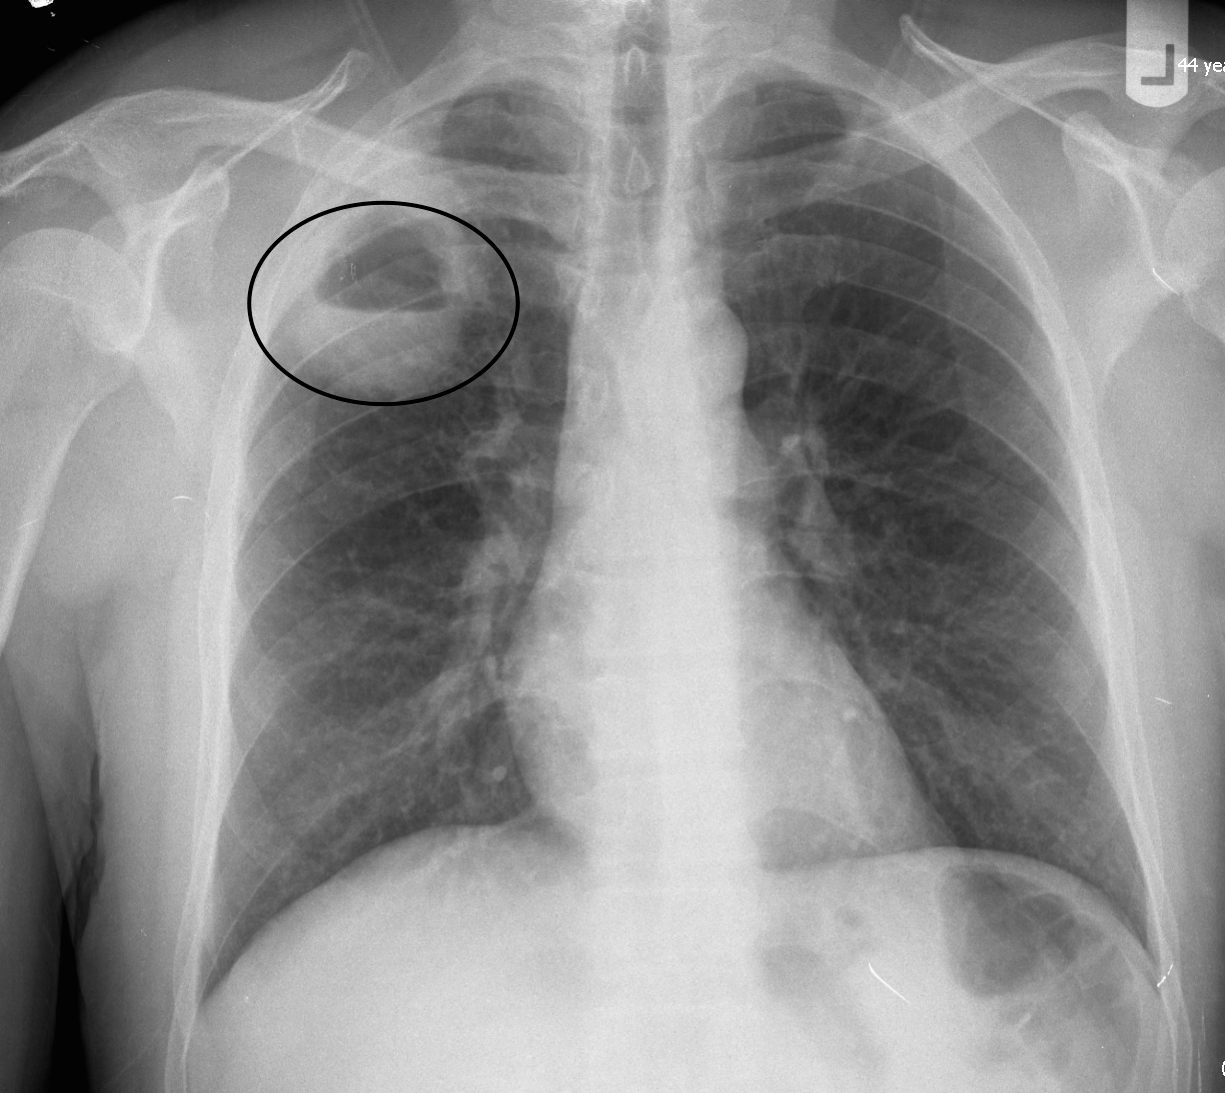 Air and fluid filled lung abscess on X-ray (source) 